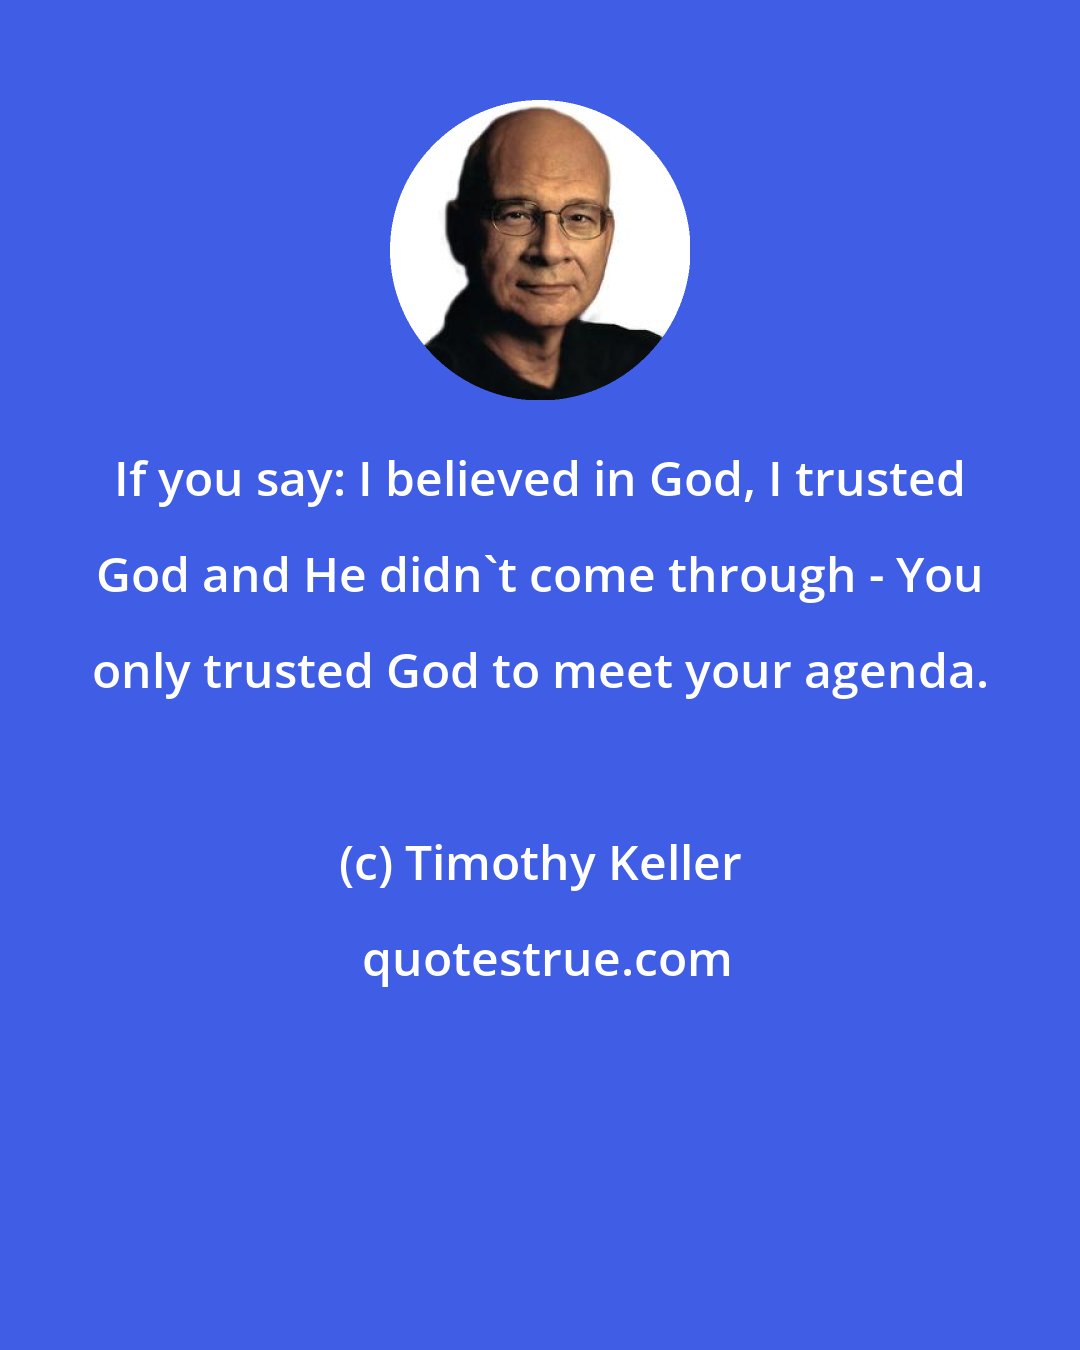 Timothy Keller: If you say: I believed in God, I trusted God and He didn't come through - You only trusted God to meet your agenda.